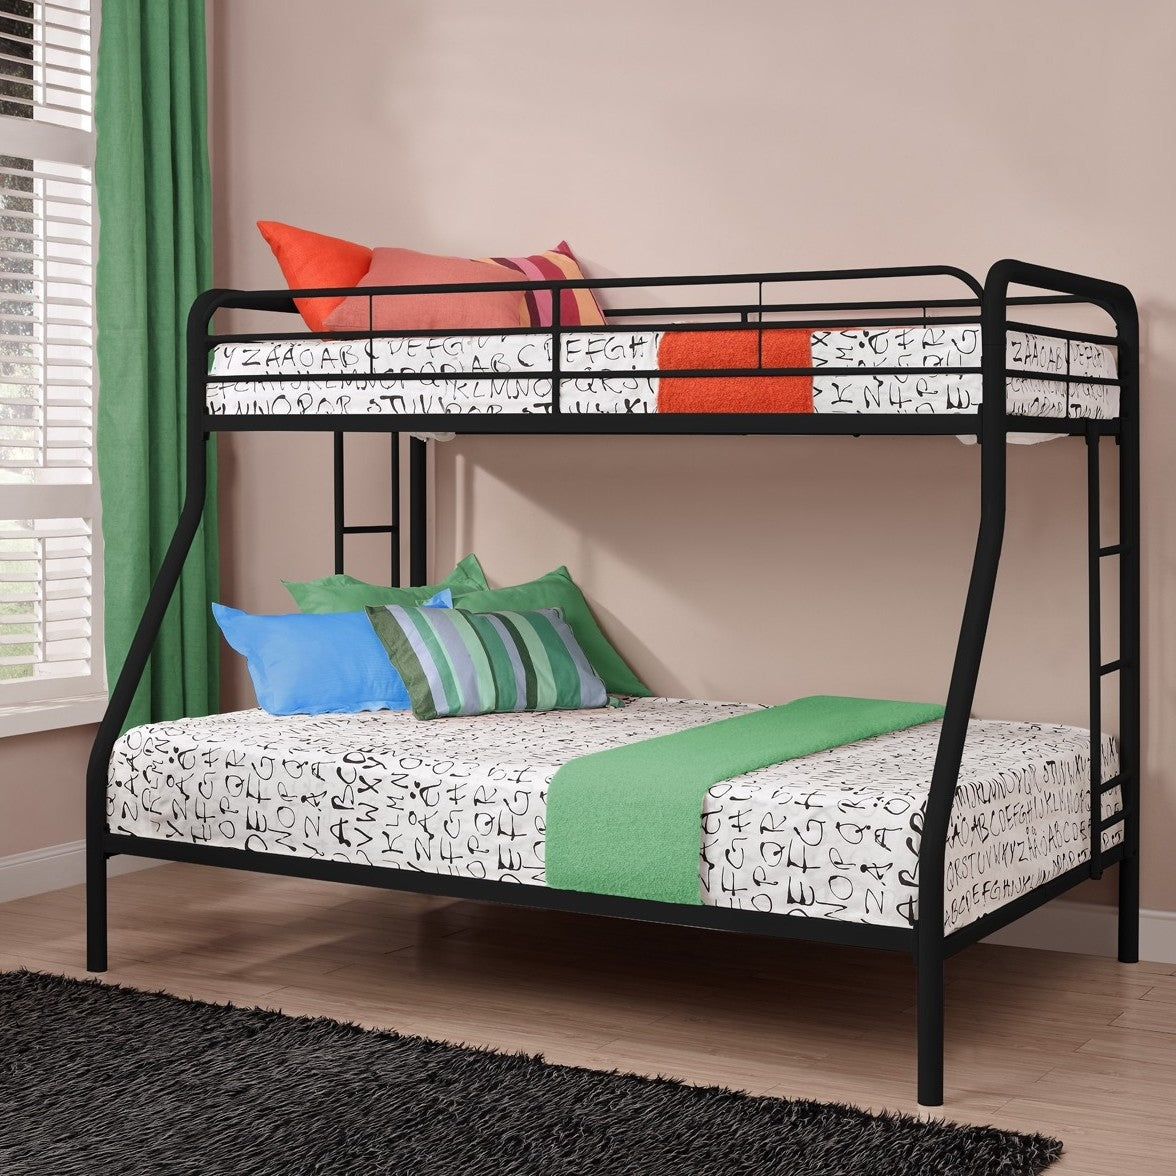 Bedroom > Bed Frames > Bunk Beds - Twin Over Full Size Bunk Bed In Sturdy Black Metal